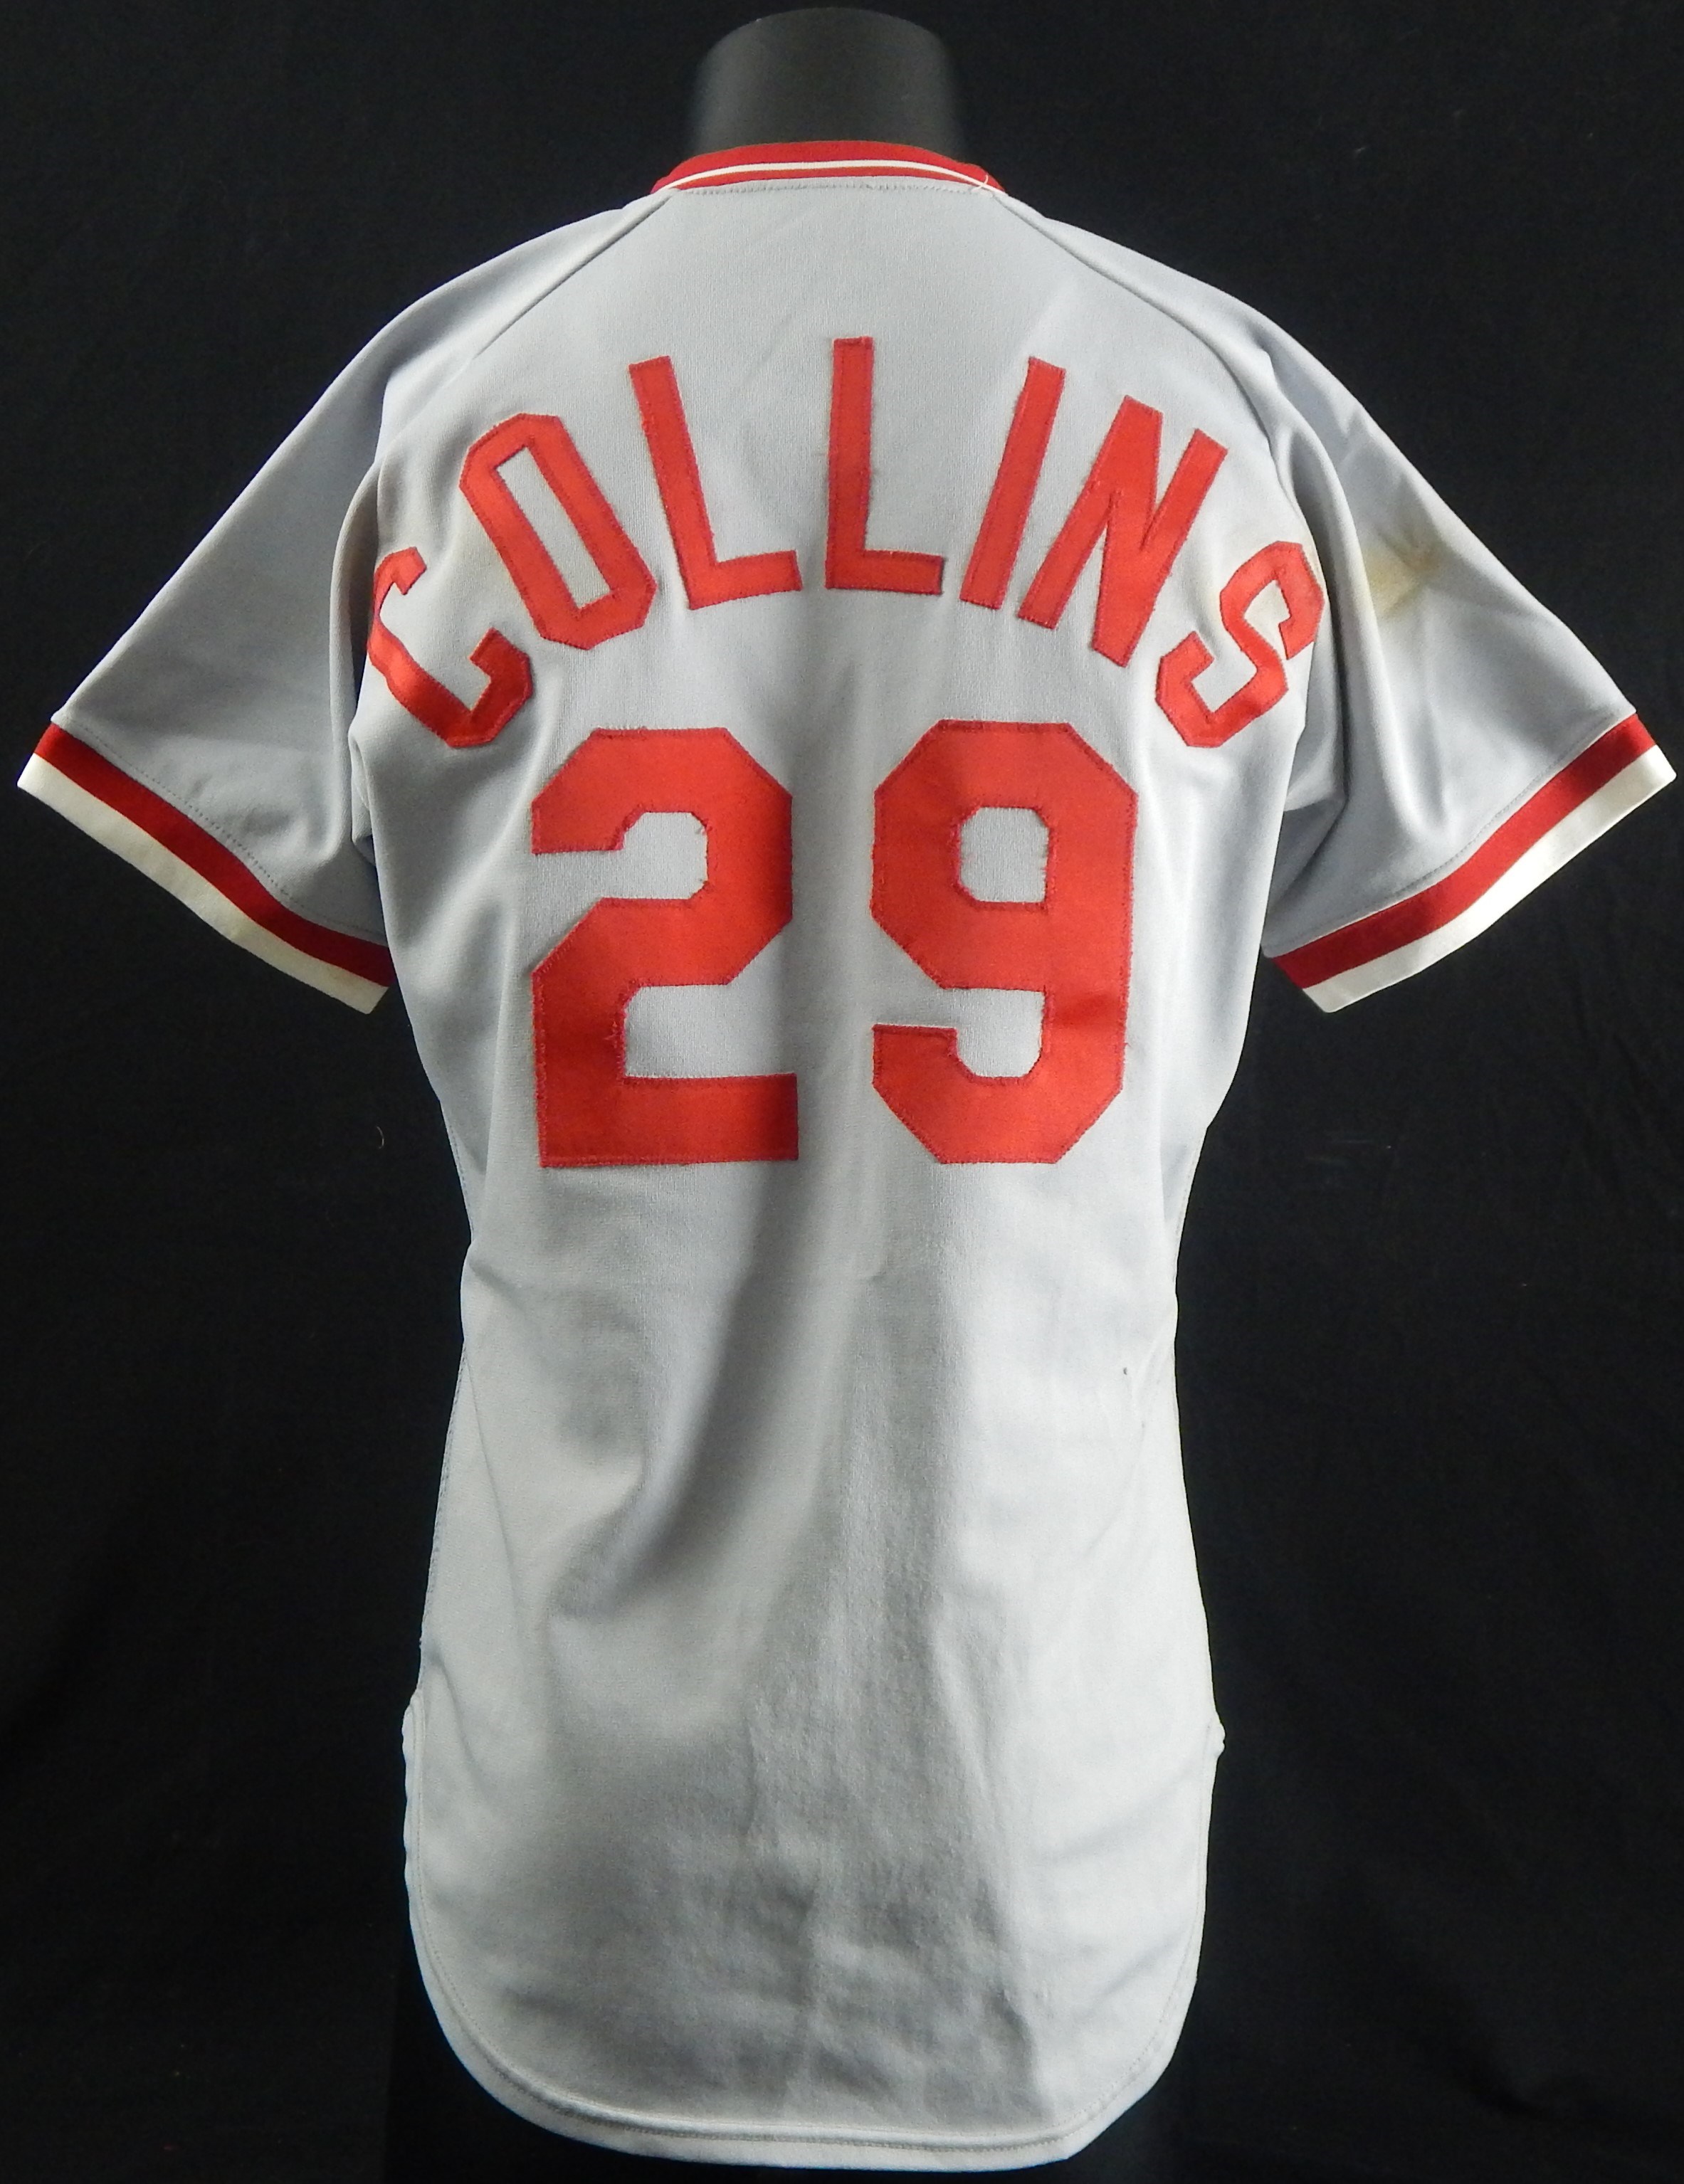 Baseball Jerseys - 1980 Dave Collins Reds Game Worn Jersey From the Bernie Stowe Collection